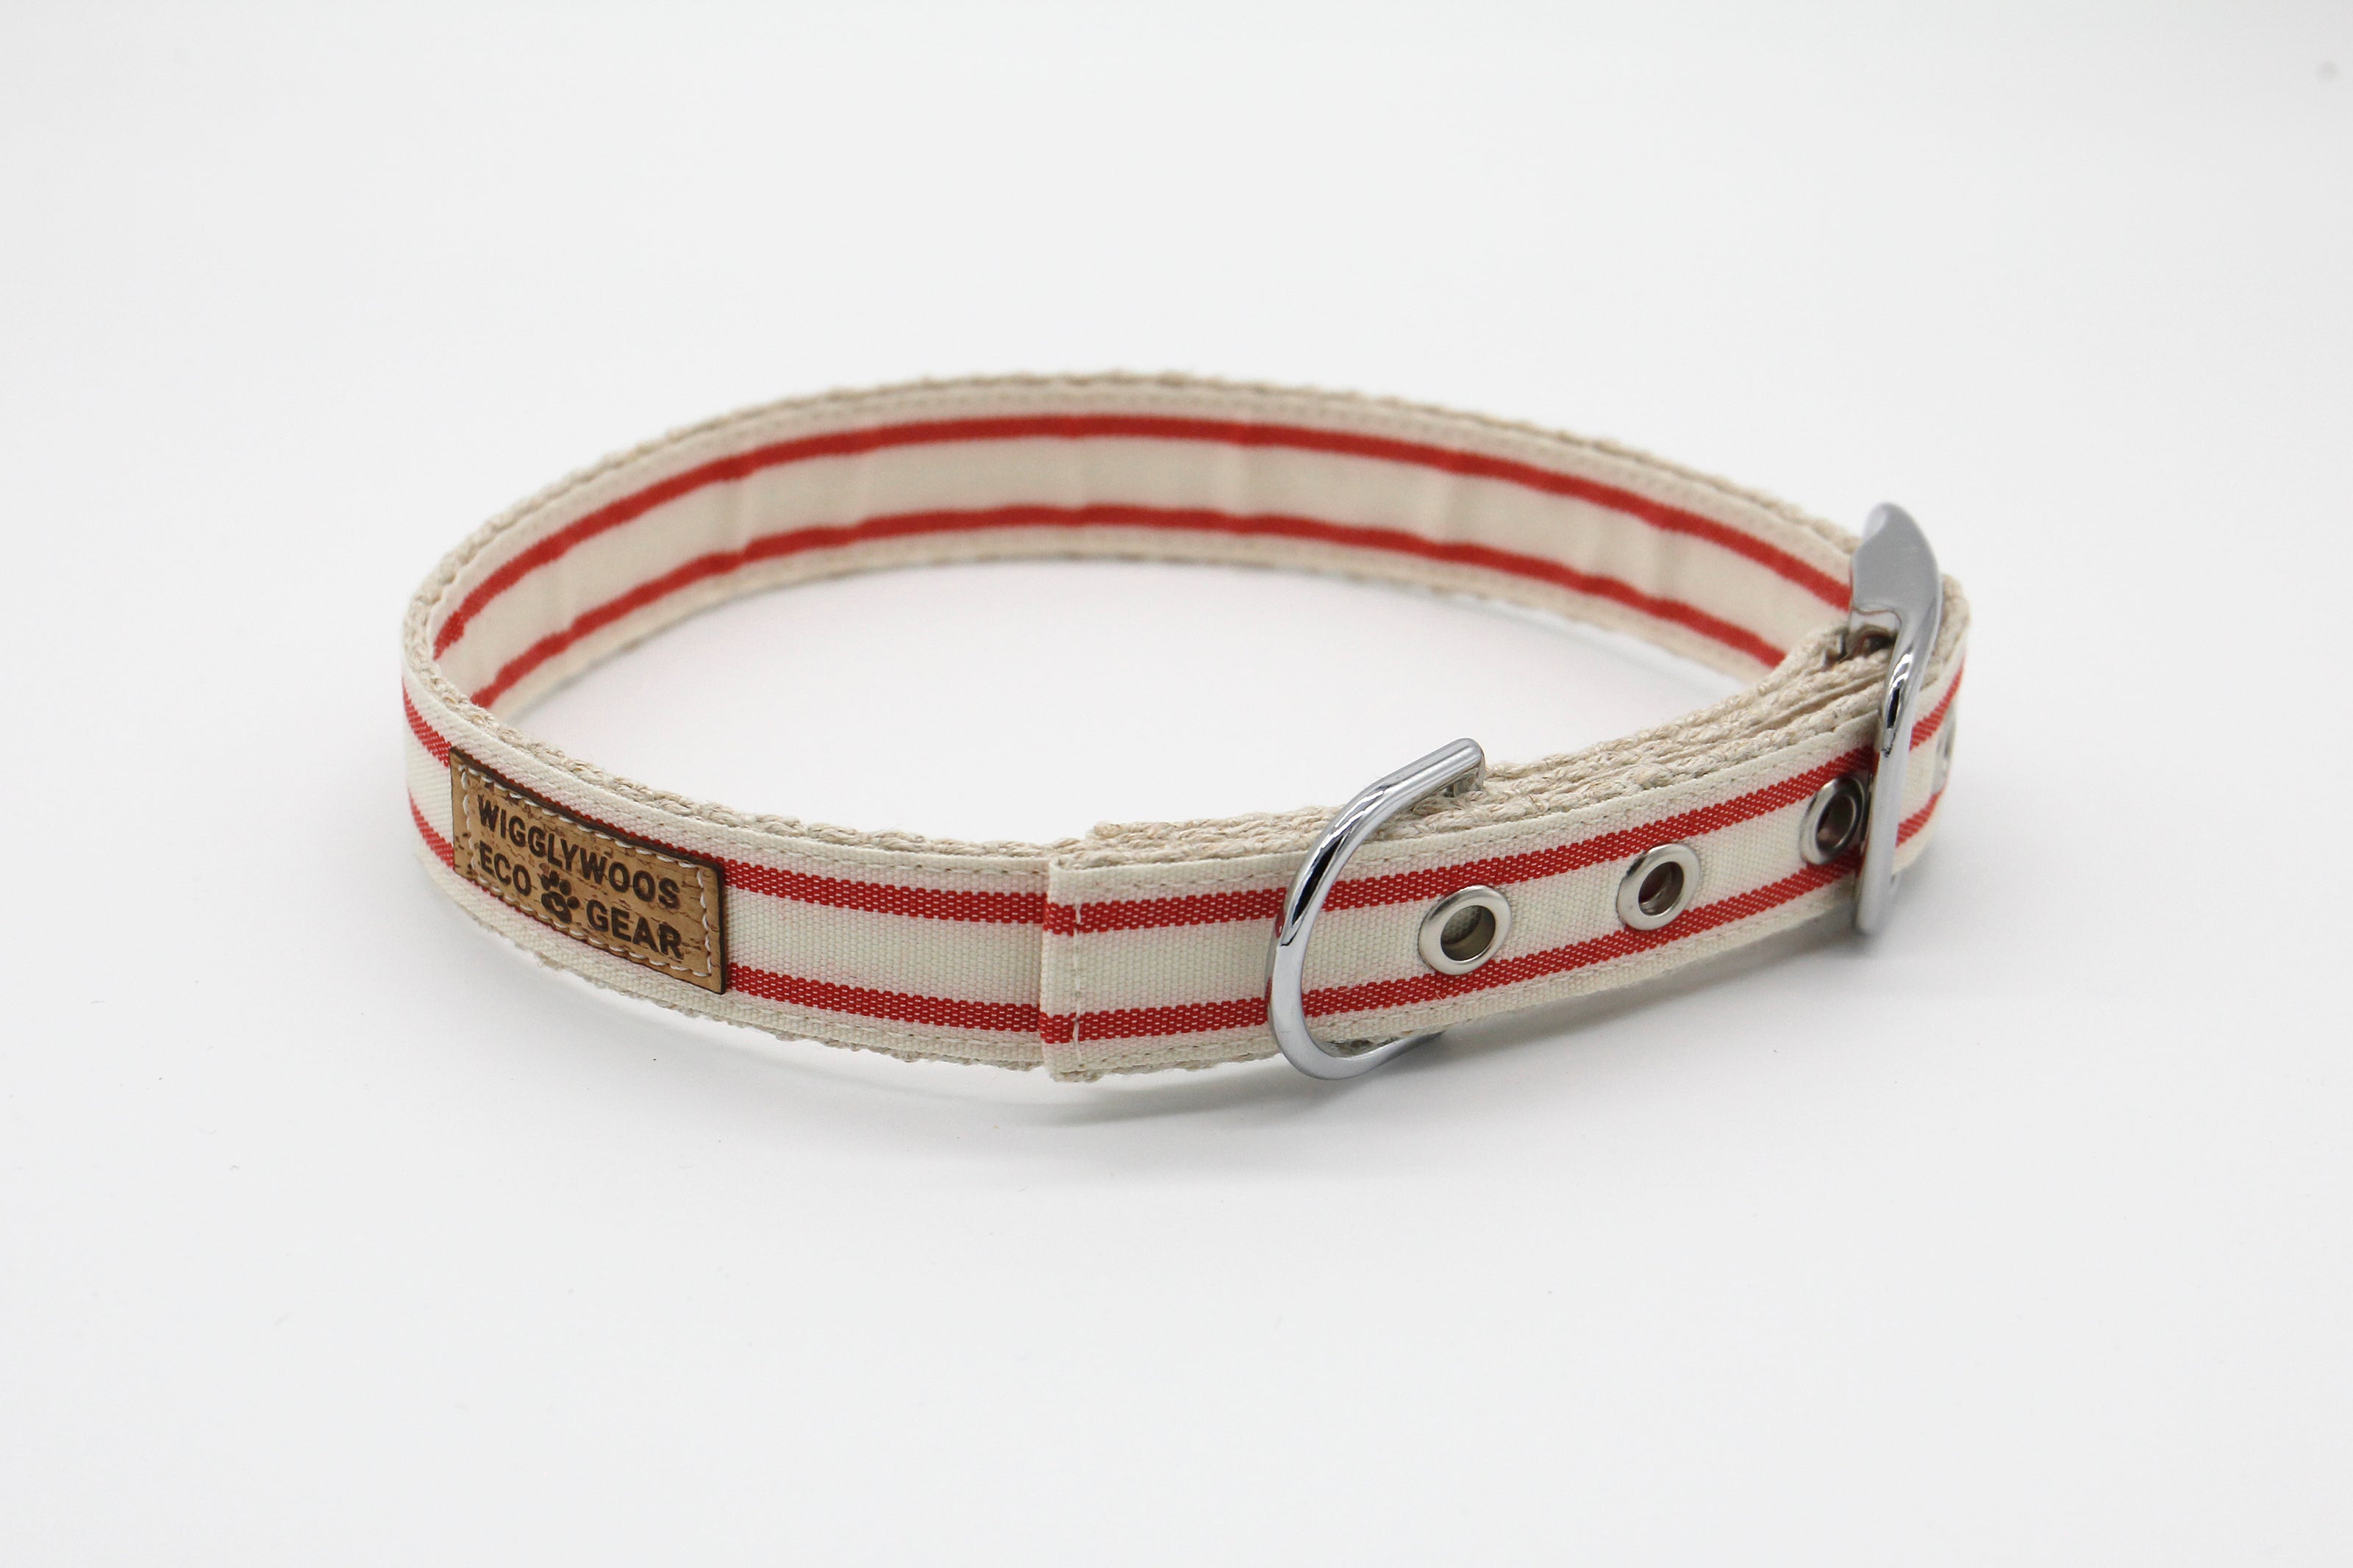 Tongue Buckle Nautical Striped Dog Collar - Red